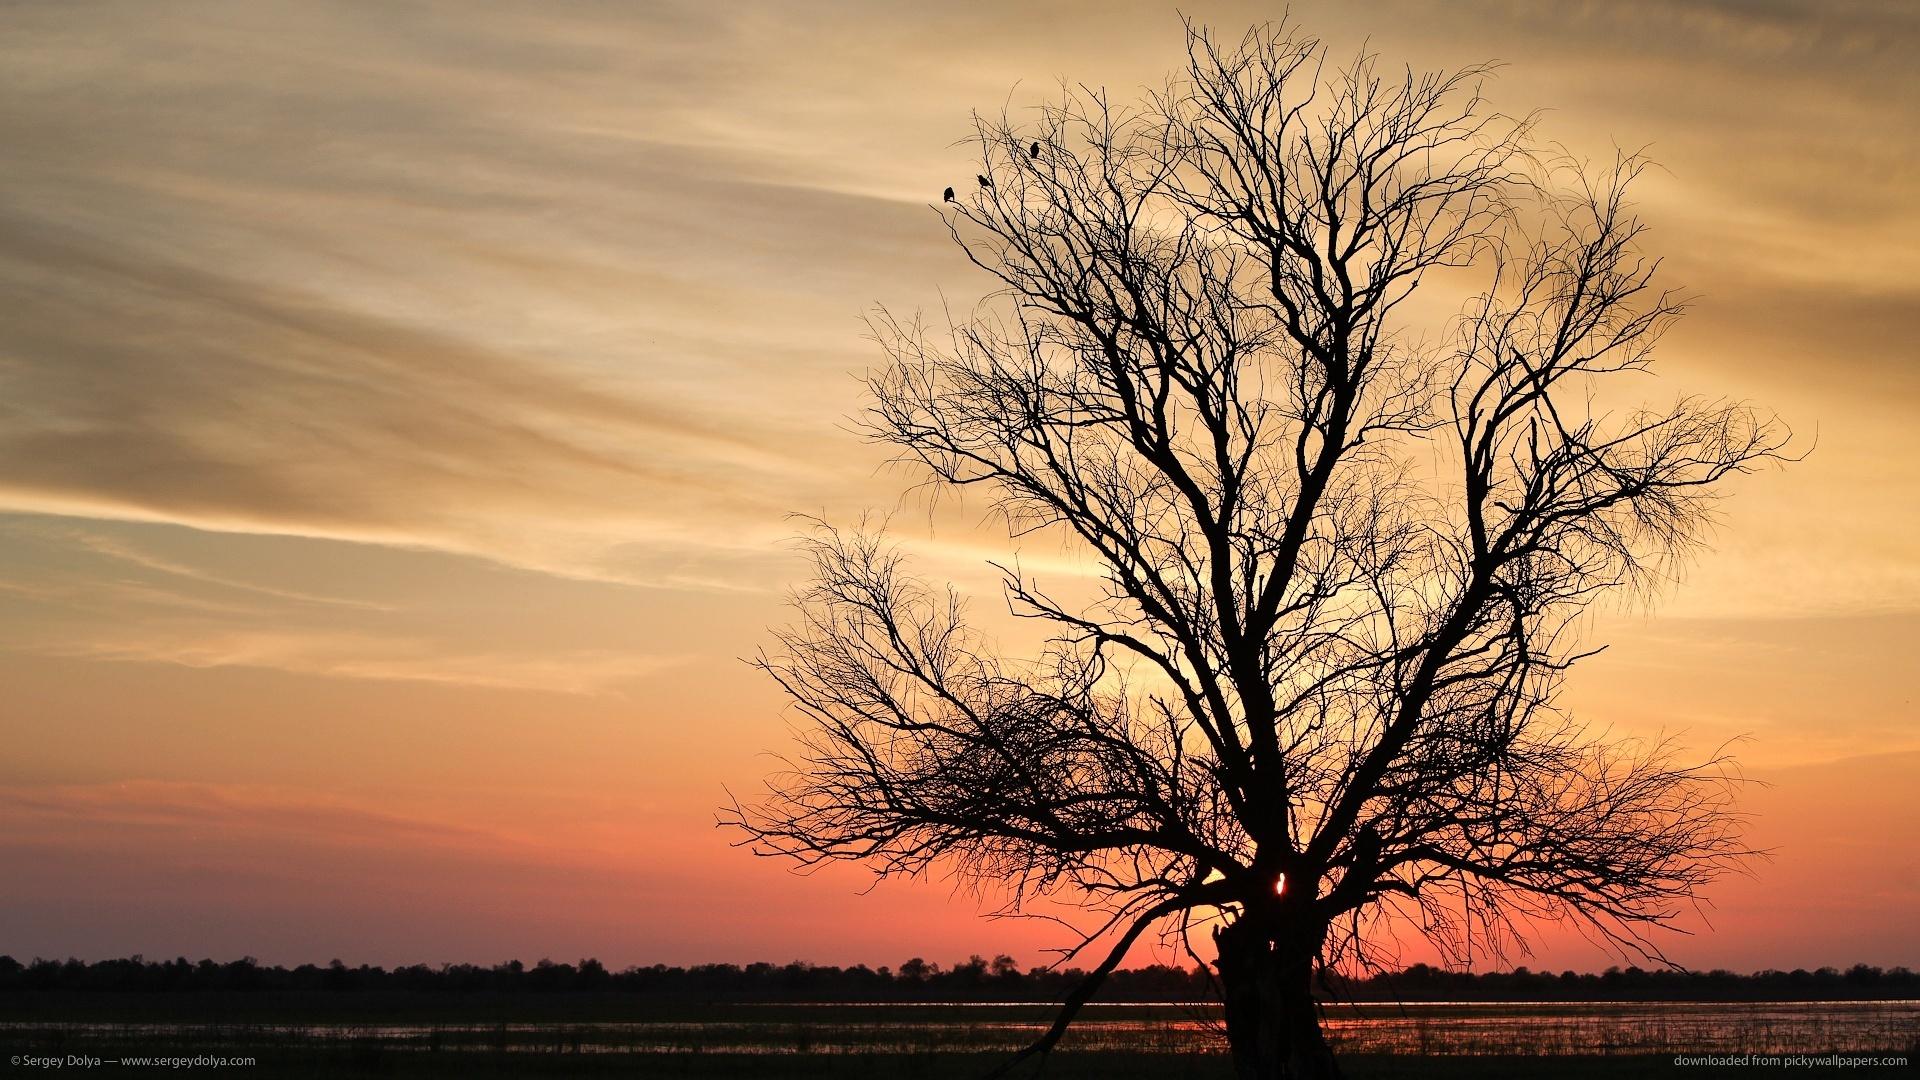 Free download Download 1920x1080 Lone Tree Silhouette